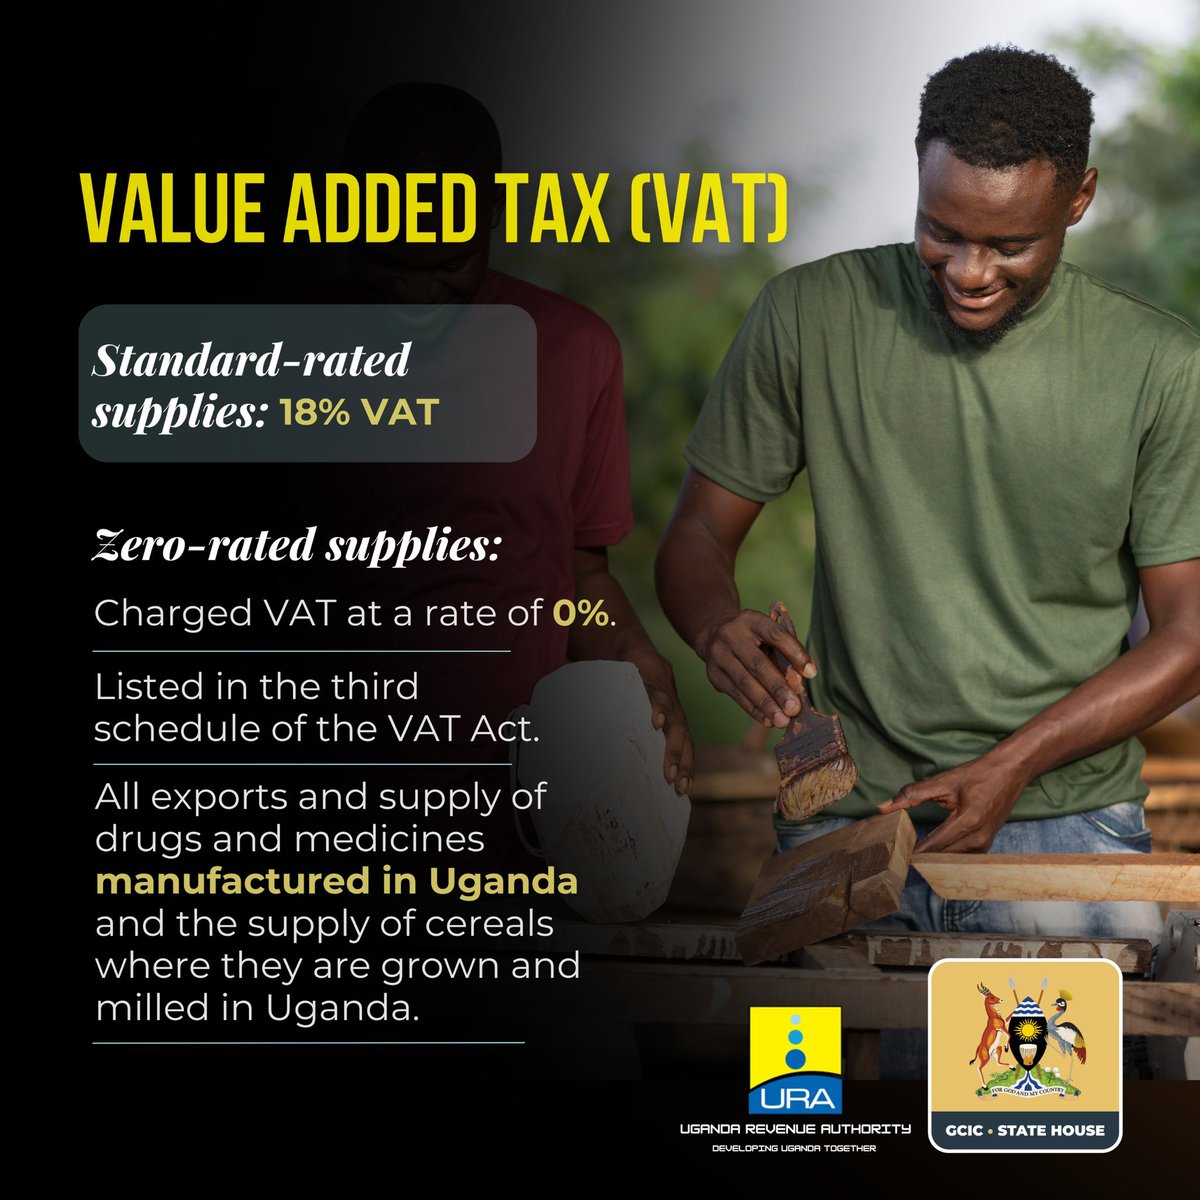 Standard-rated supplies in Uganda are charged 18% VAT, while zero-rated supplies are charged at 0% VAT. This applies to all exports, drugs, medicines, and cereals produced in Uganda. @URAuganda #OpenGovUg